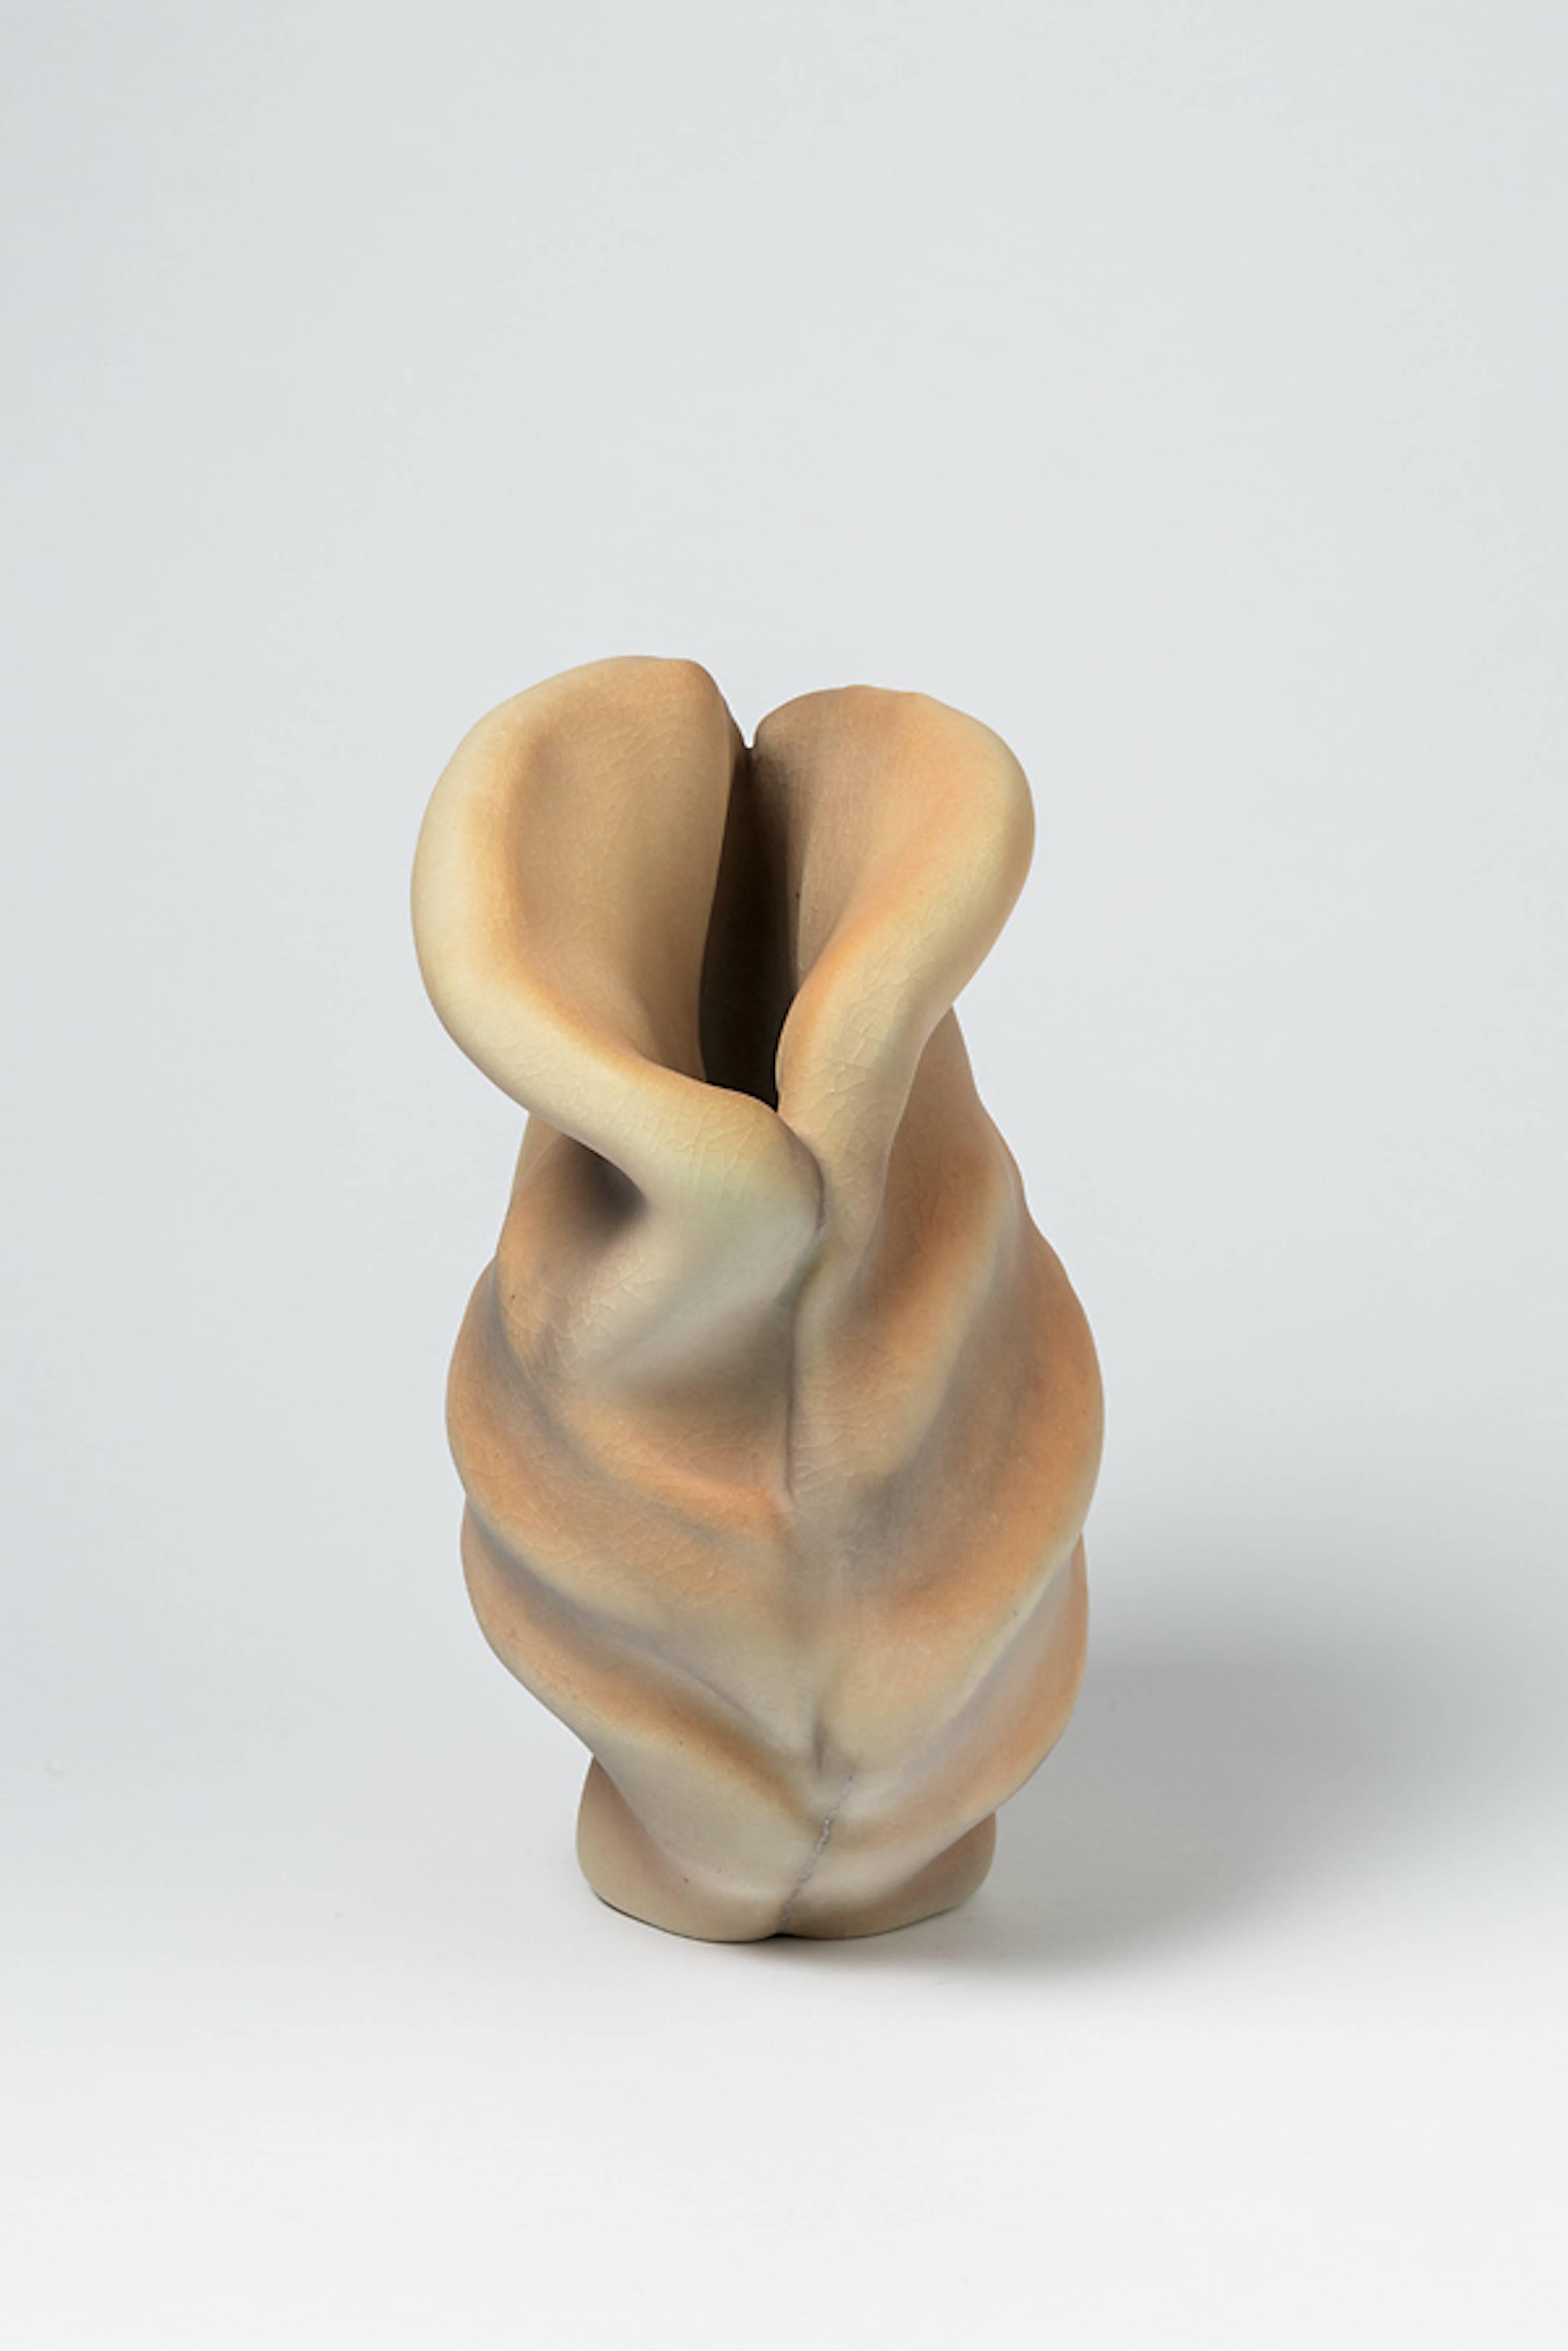 Molded Porcelain Sculpture by Wayne Fischer 'French - American, ' circa 2016